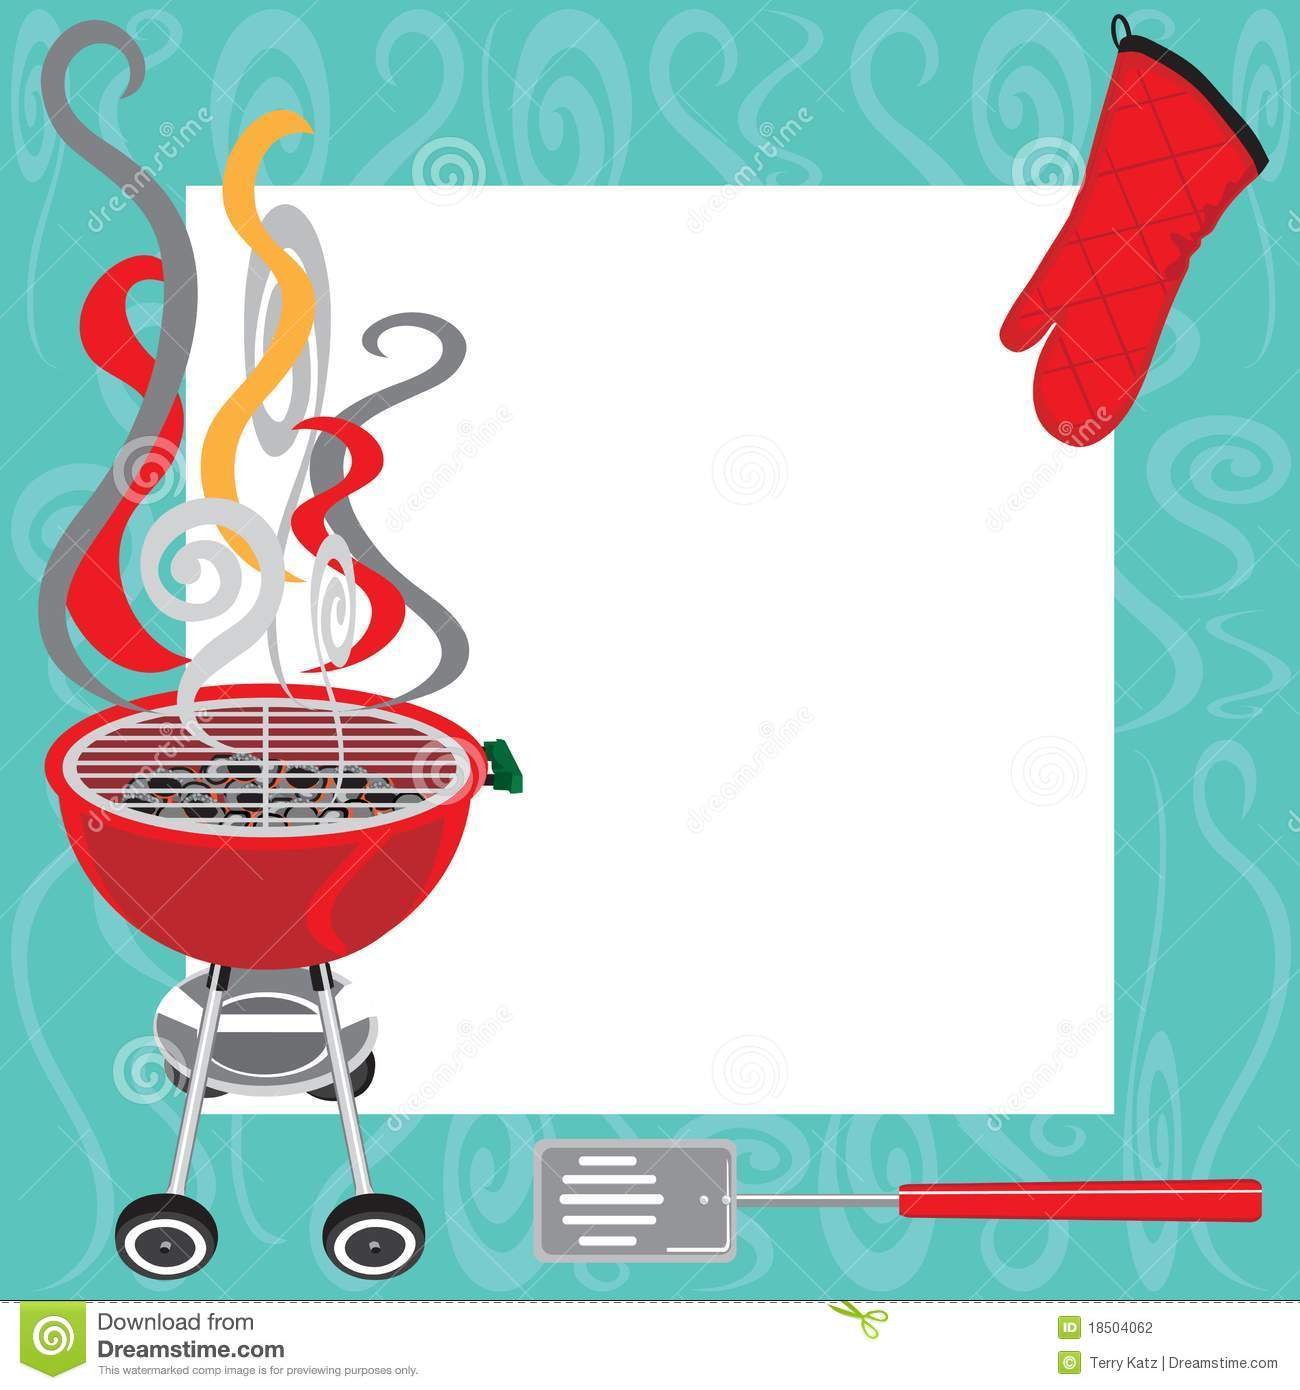 Bbq Party Invitation Stock Vector Illustration Of Flames 18504062 in size 1300 X 1390